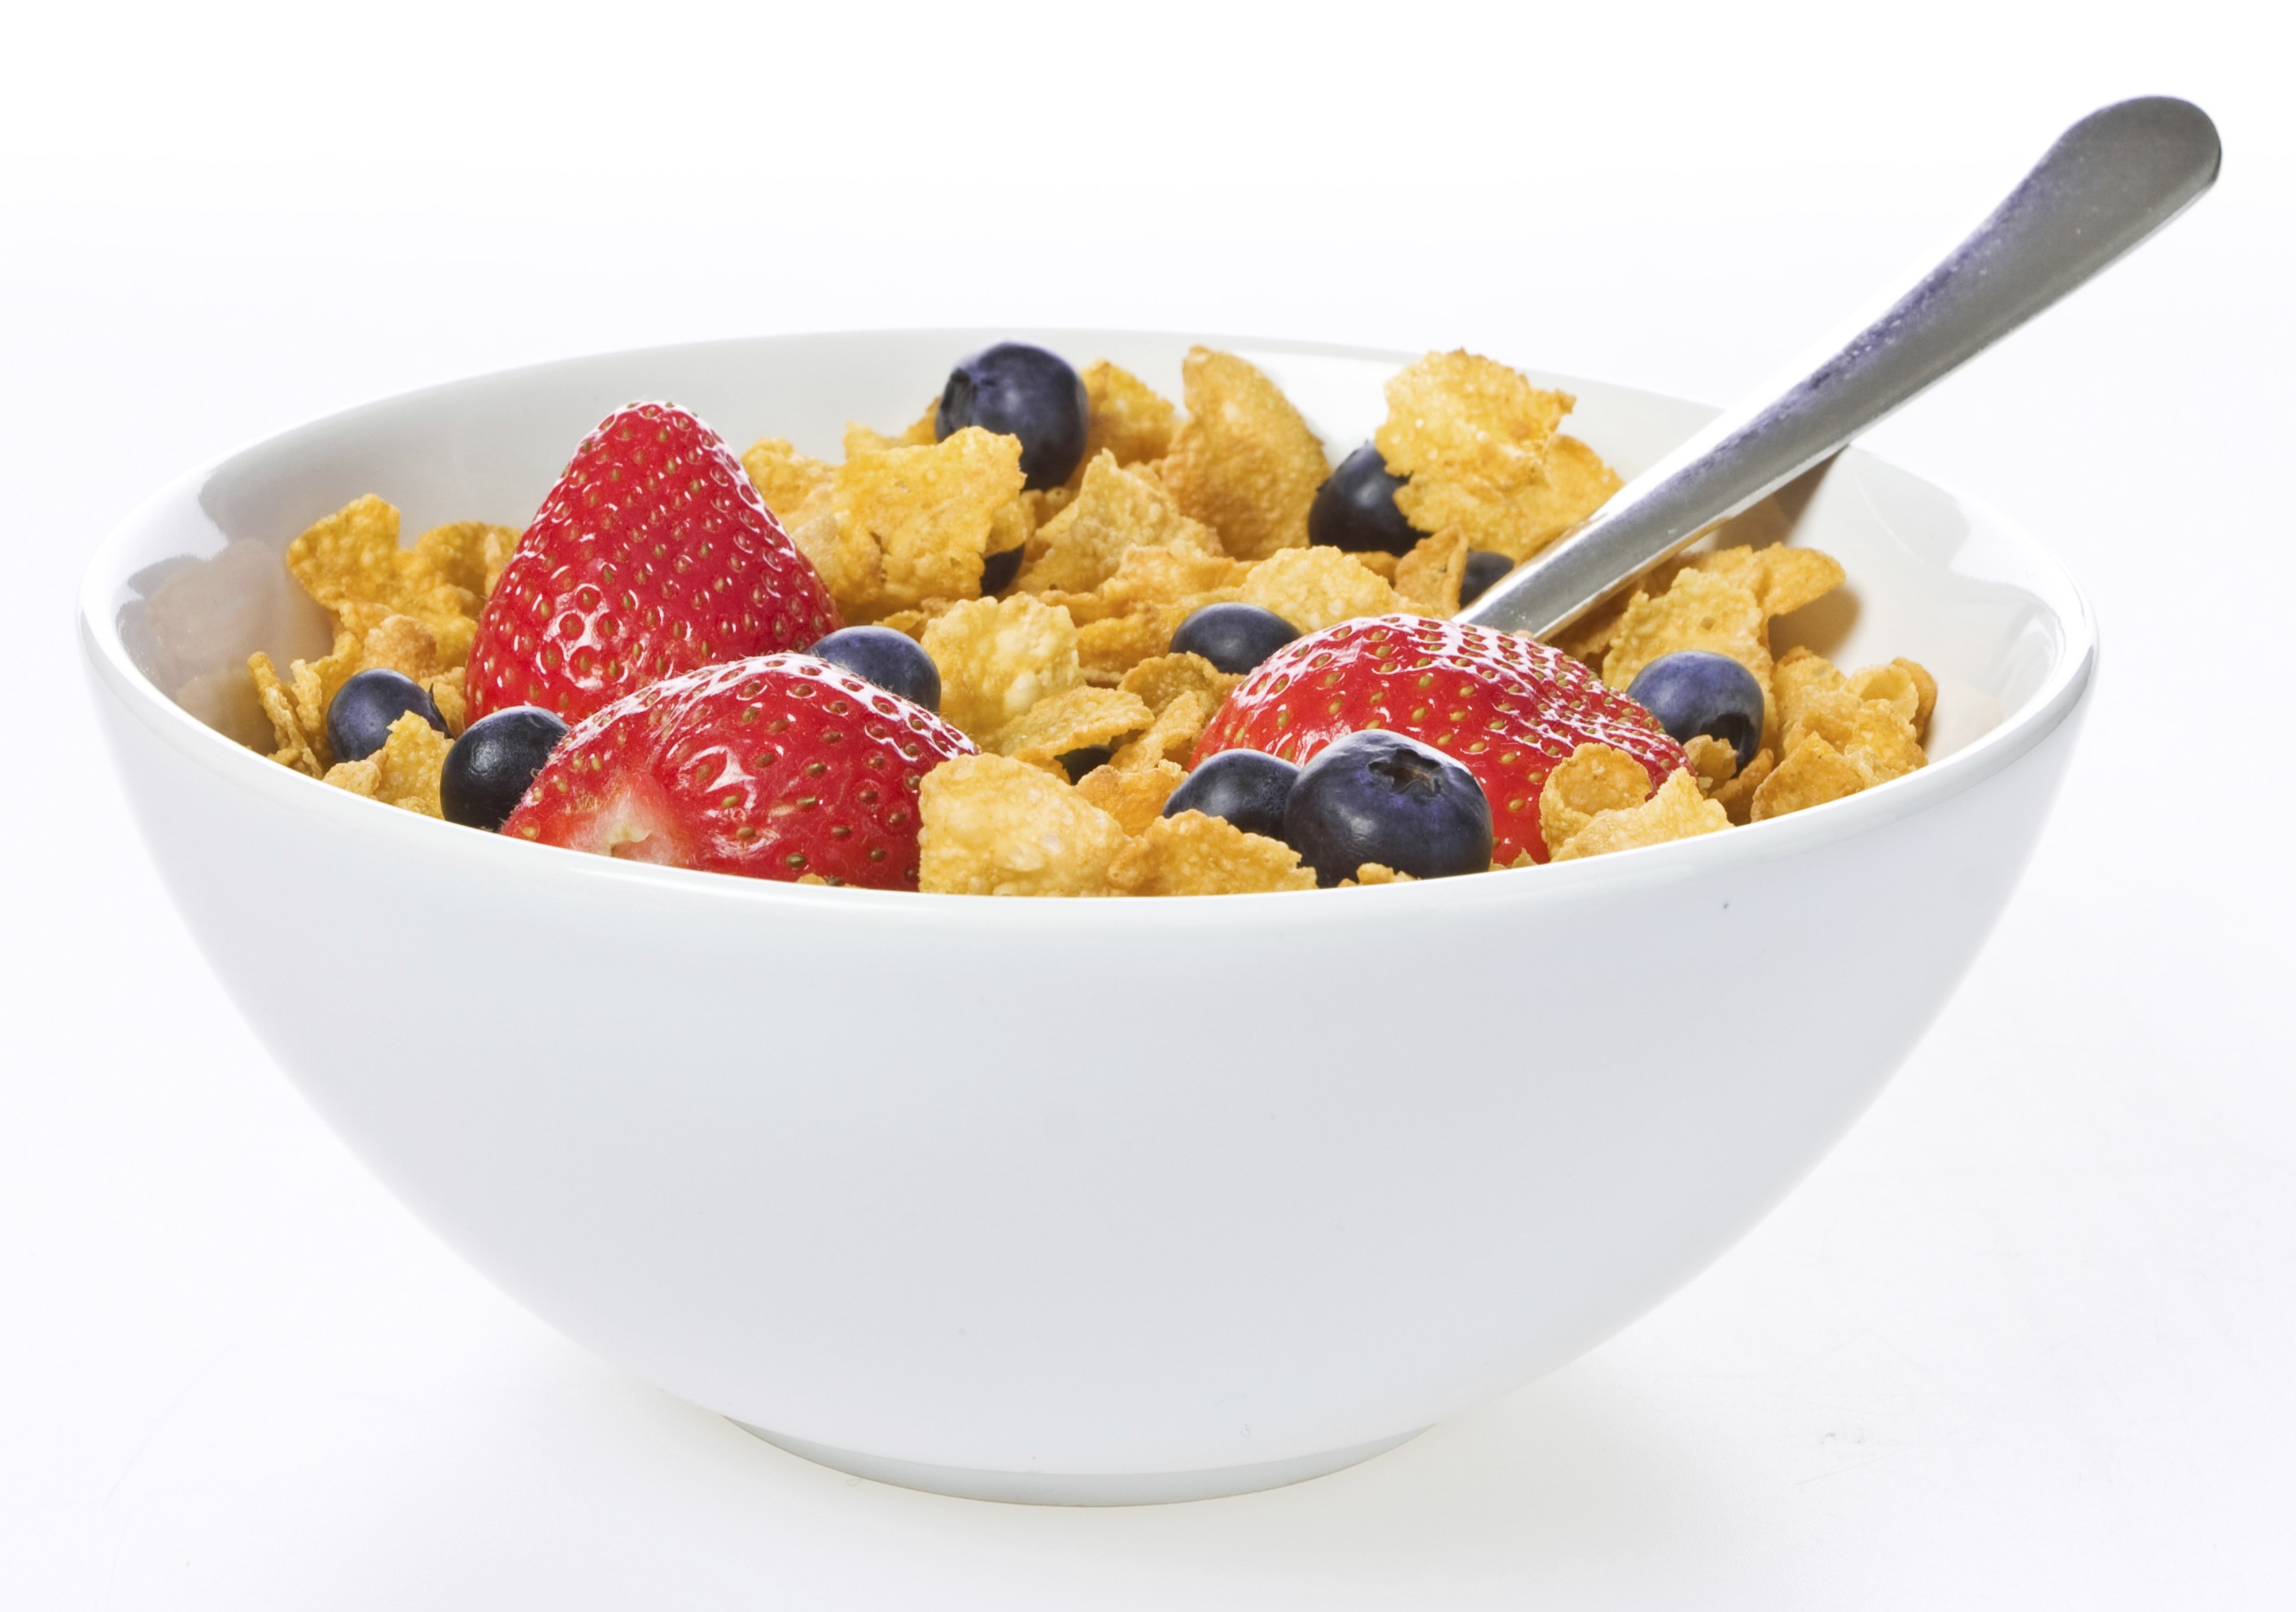 Feed your office Cereal Bowl 